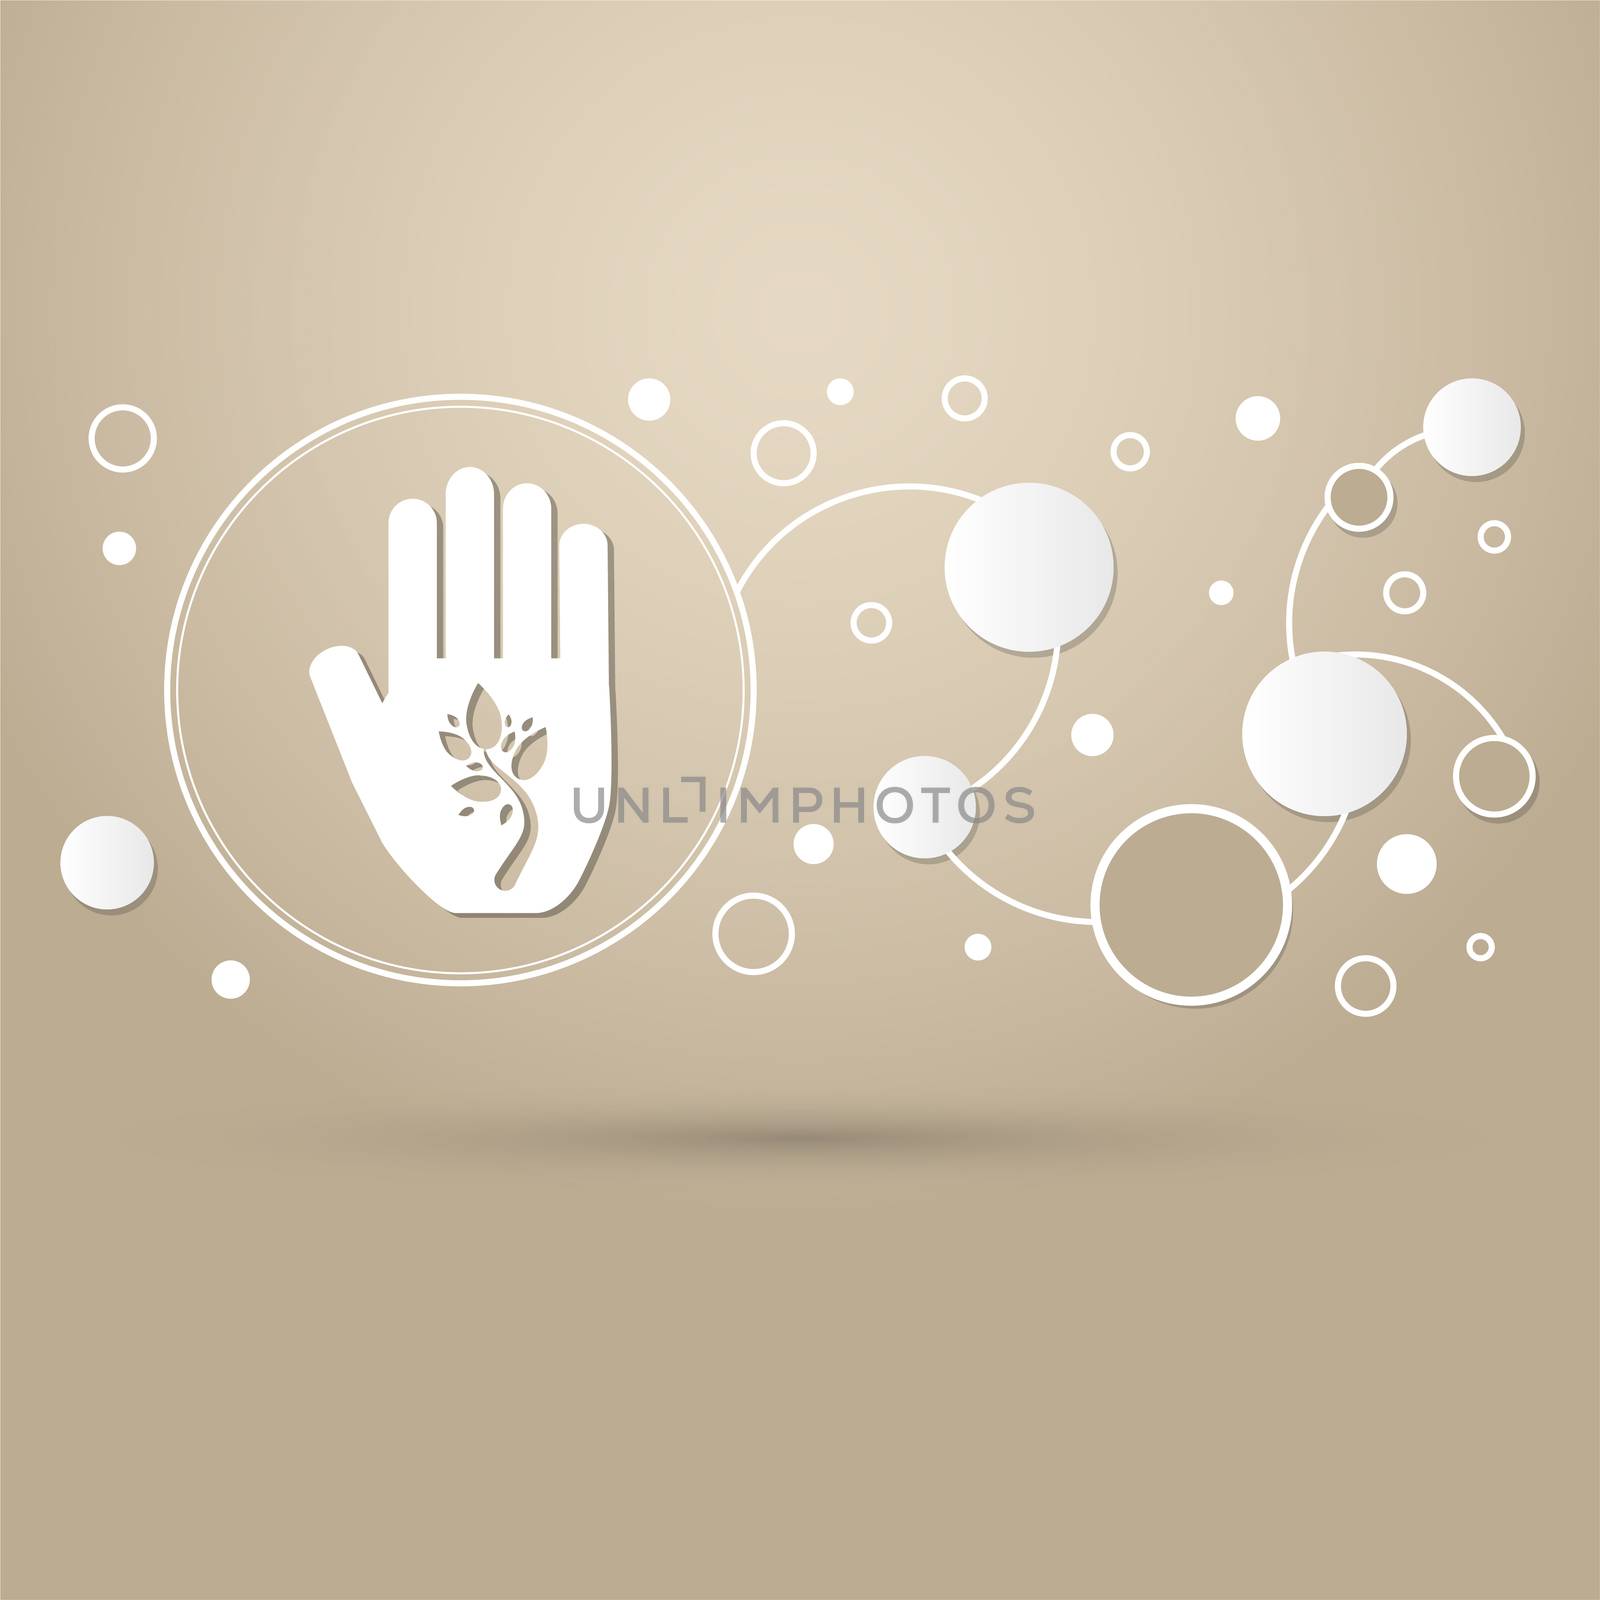 ecological beauty and health care, enviromental protection icon on a brown background with elegant style modern design infographic.  by Adamchuk